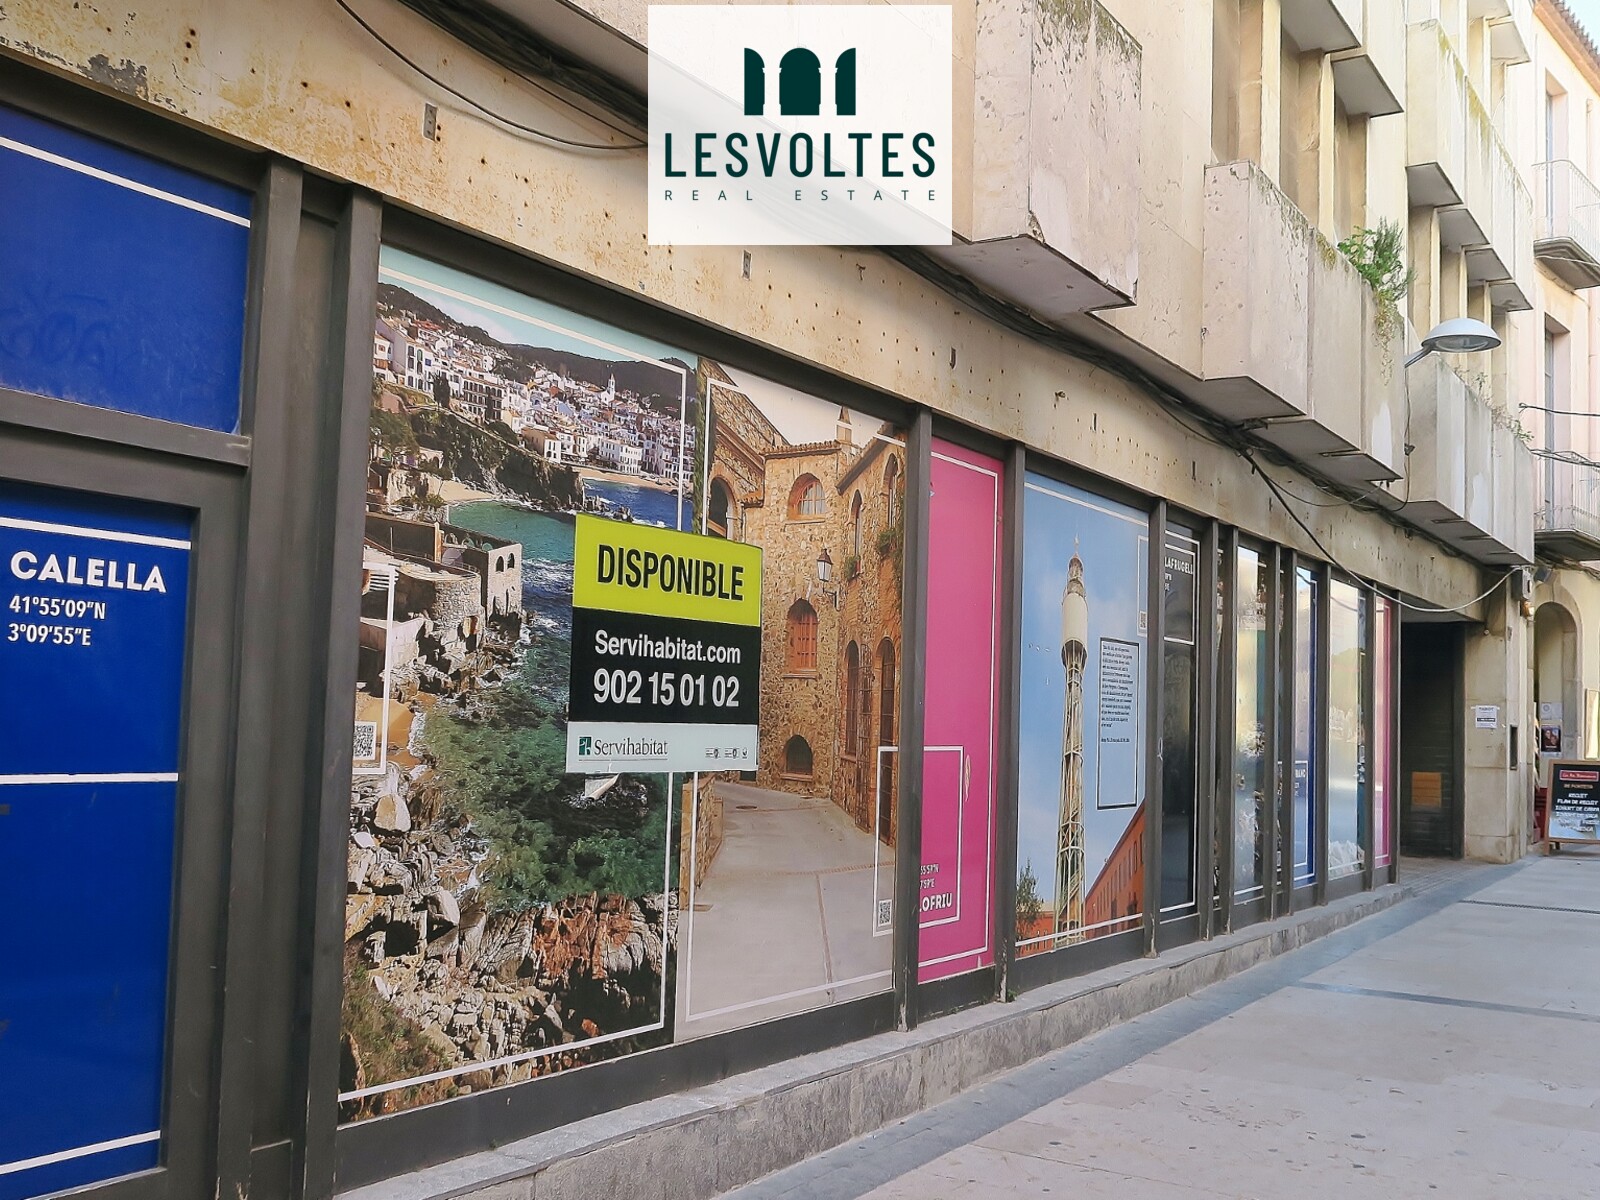 COMMERCIAL PREMISES 173 M2 WITH GREAT SHOWCASE IN THE PEDESTRIAN CENTER OF PALAFRUGELL.